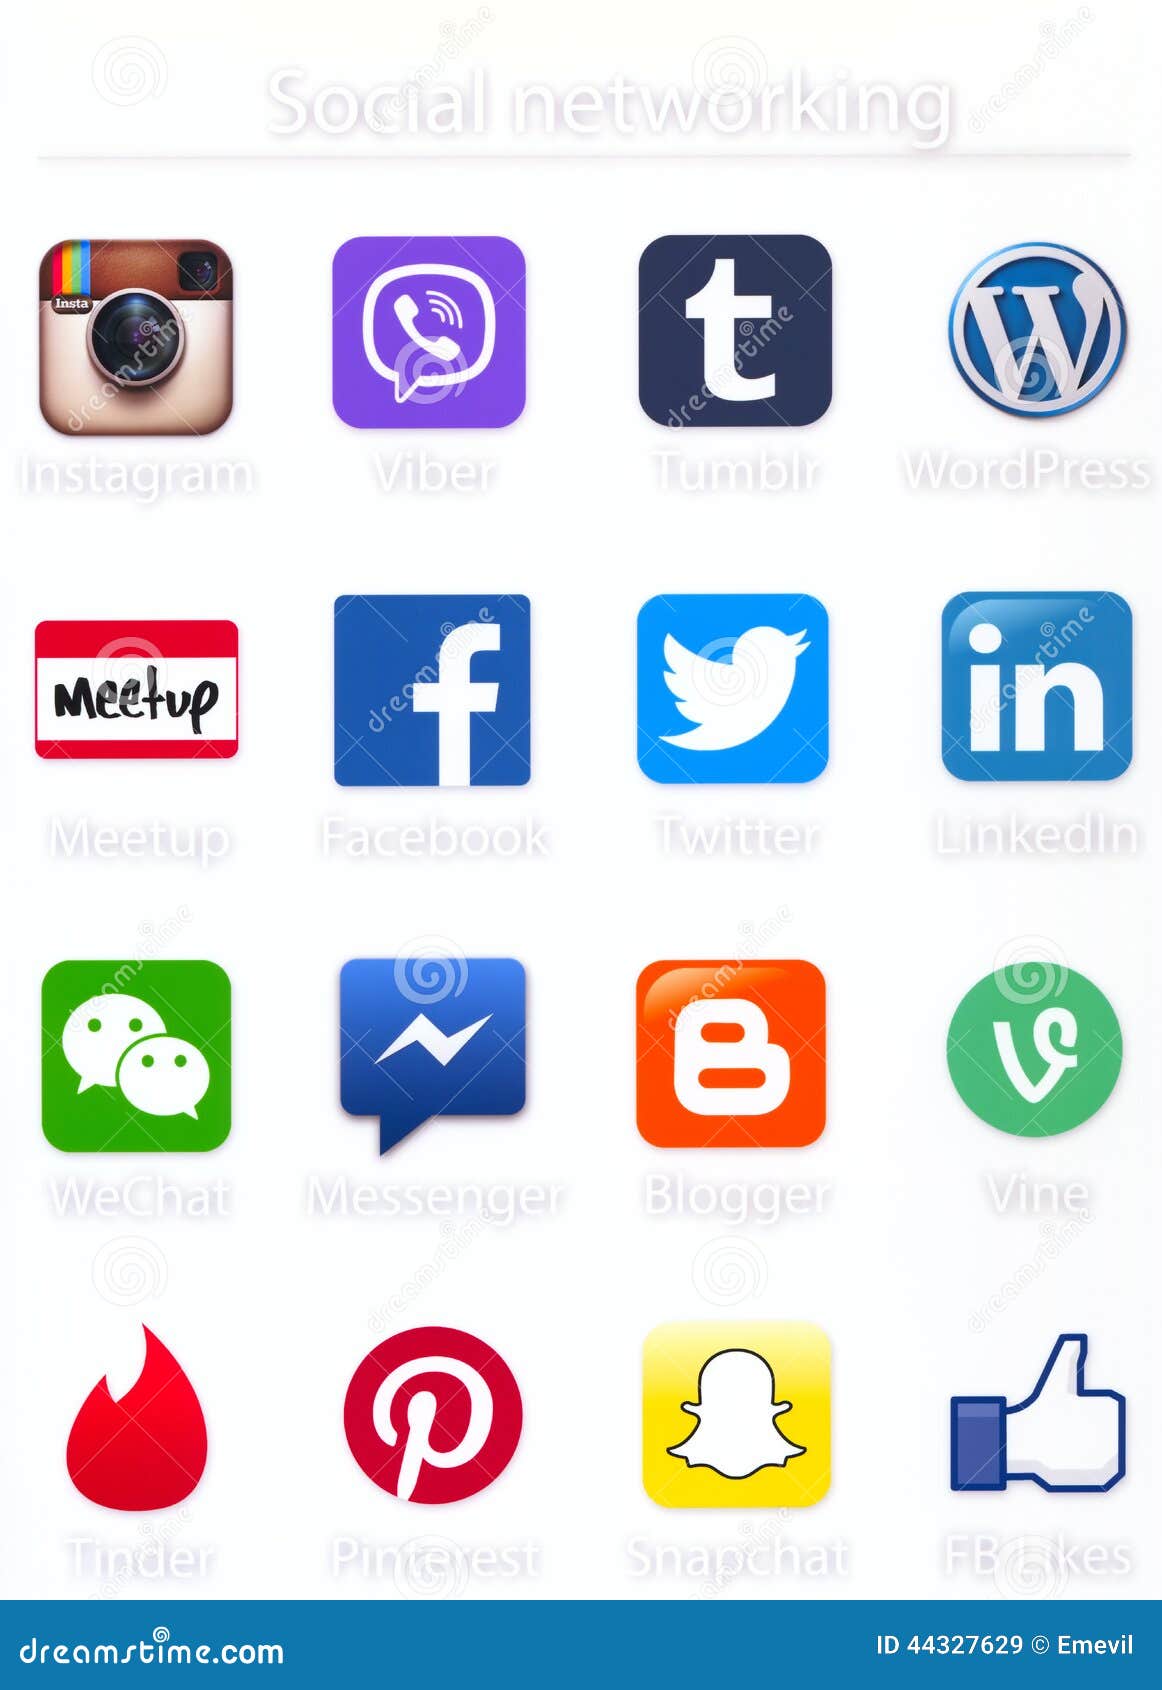 Networking apps social 10 Best